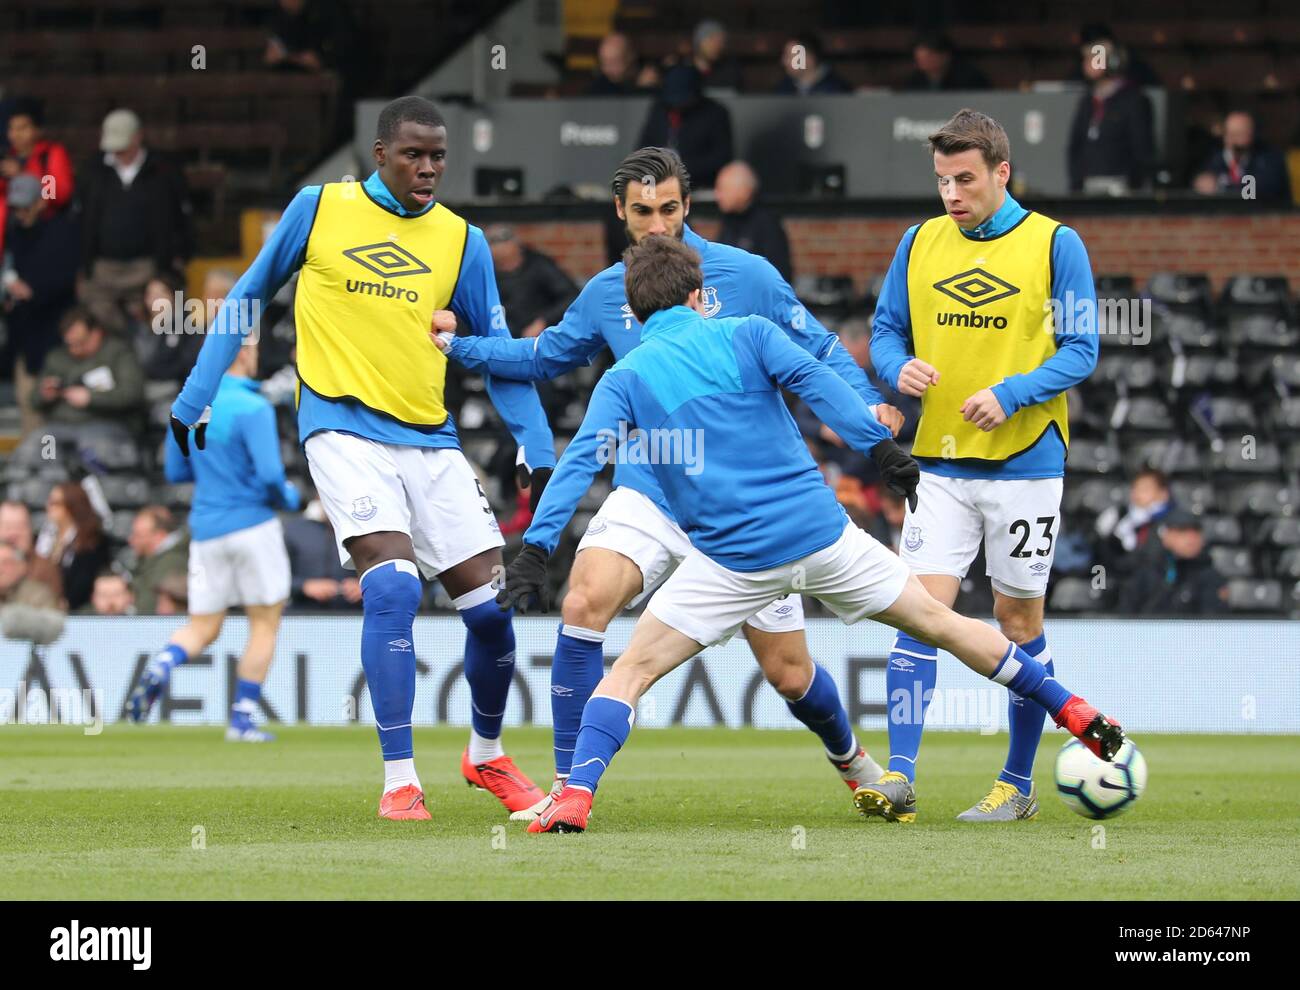 Everton players warm up on the pitch ahead of the game Stock Photo